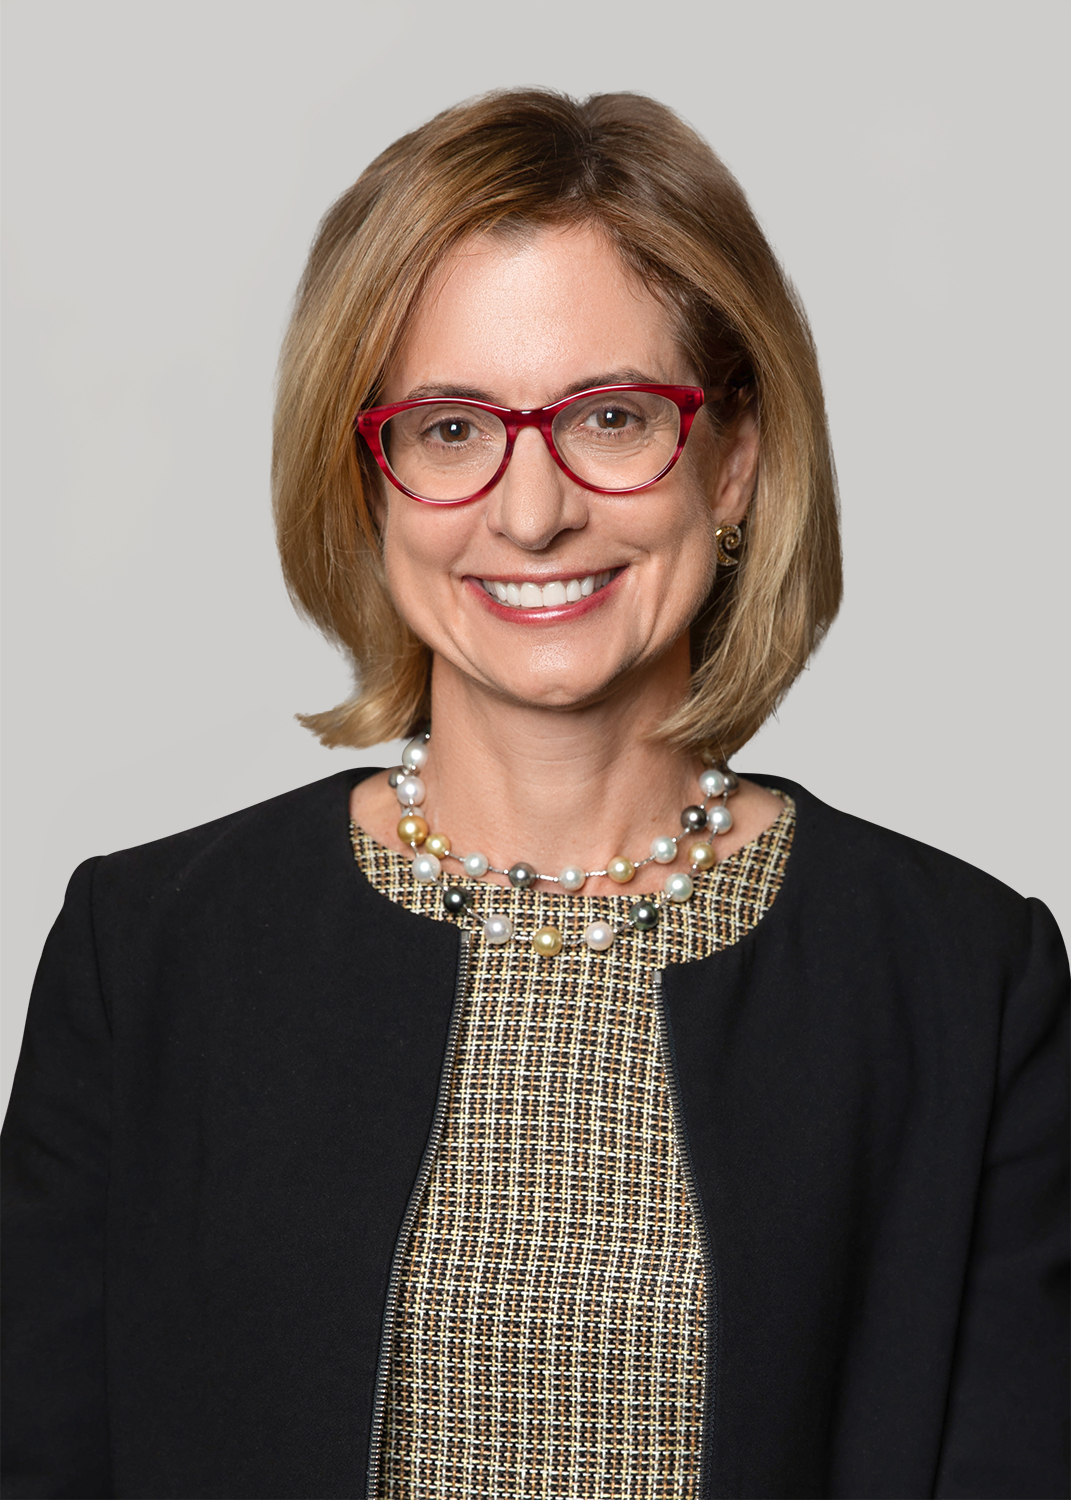 Realterm appoints Karen Grieb Inal to Board of Directors | Realterm